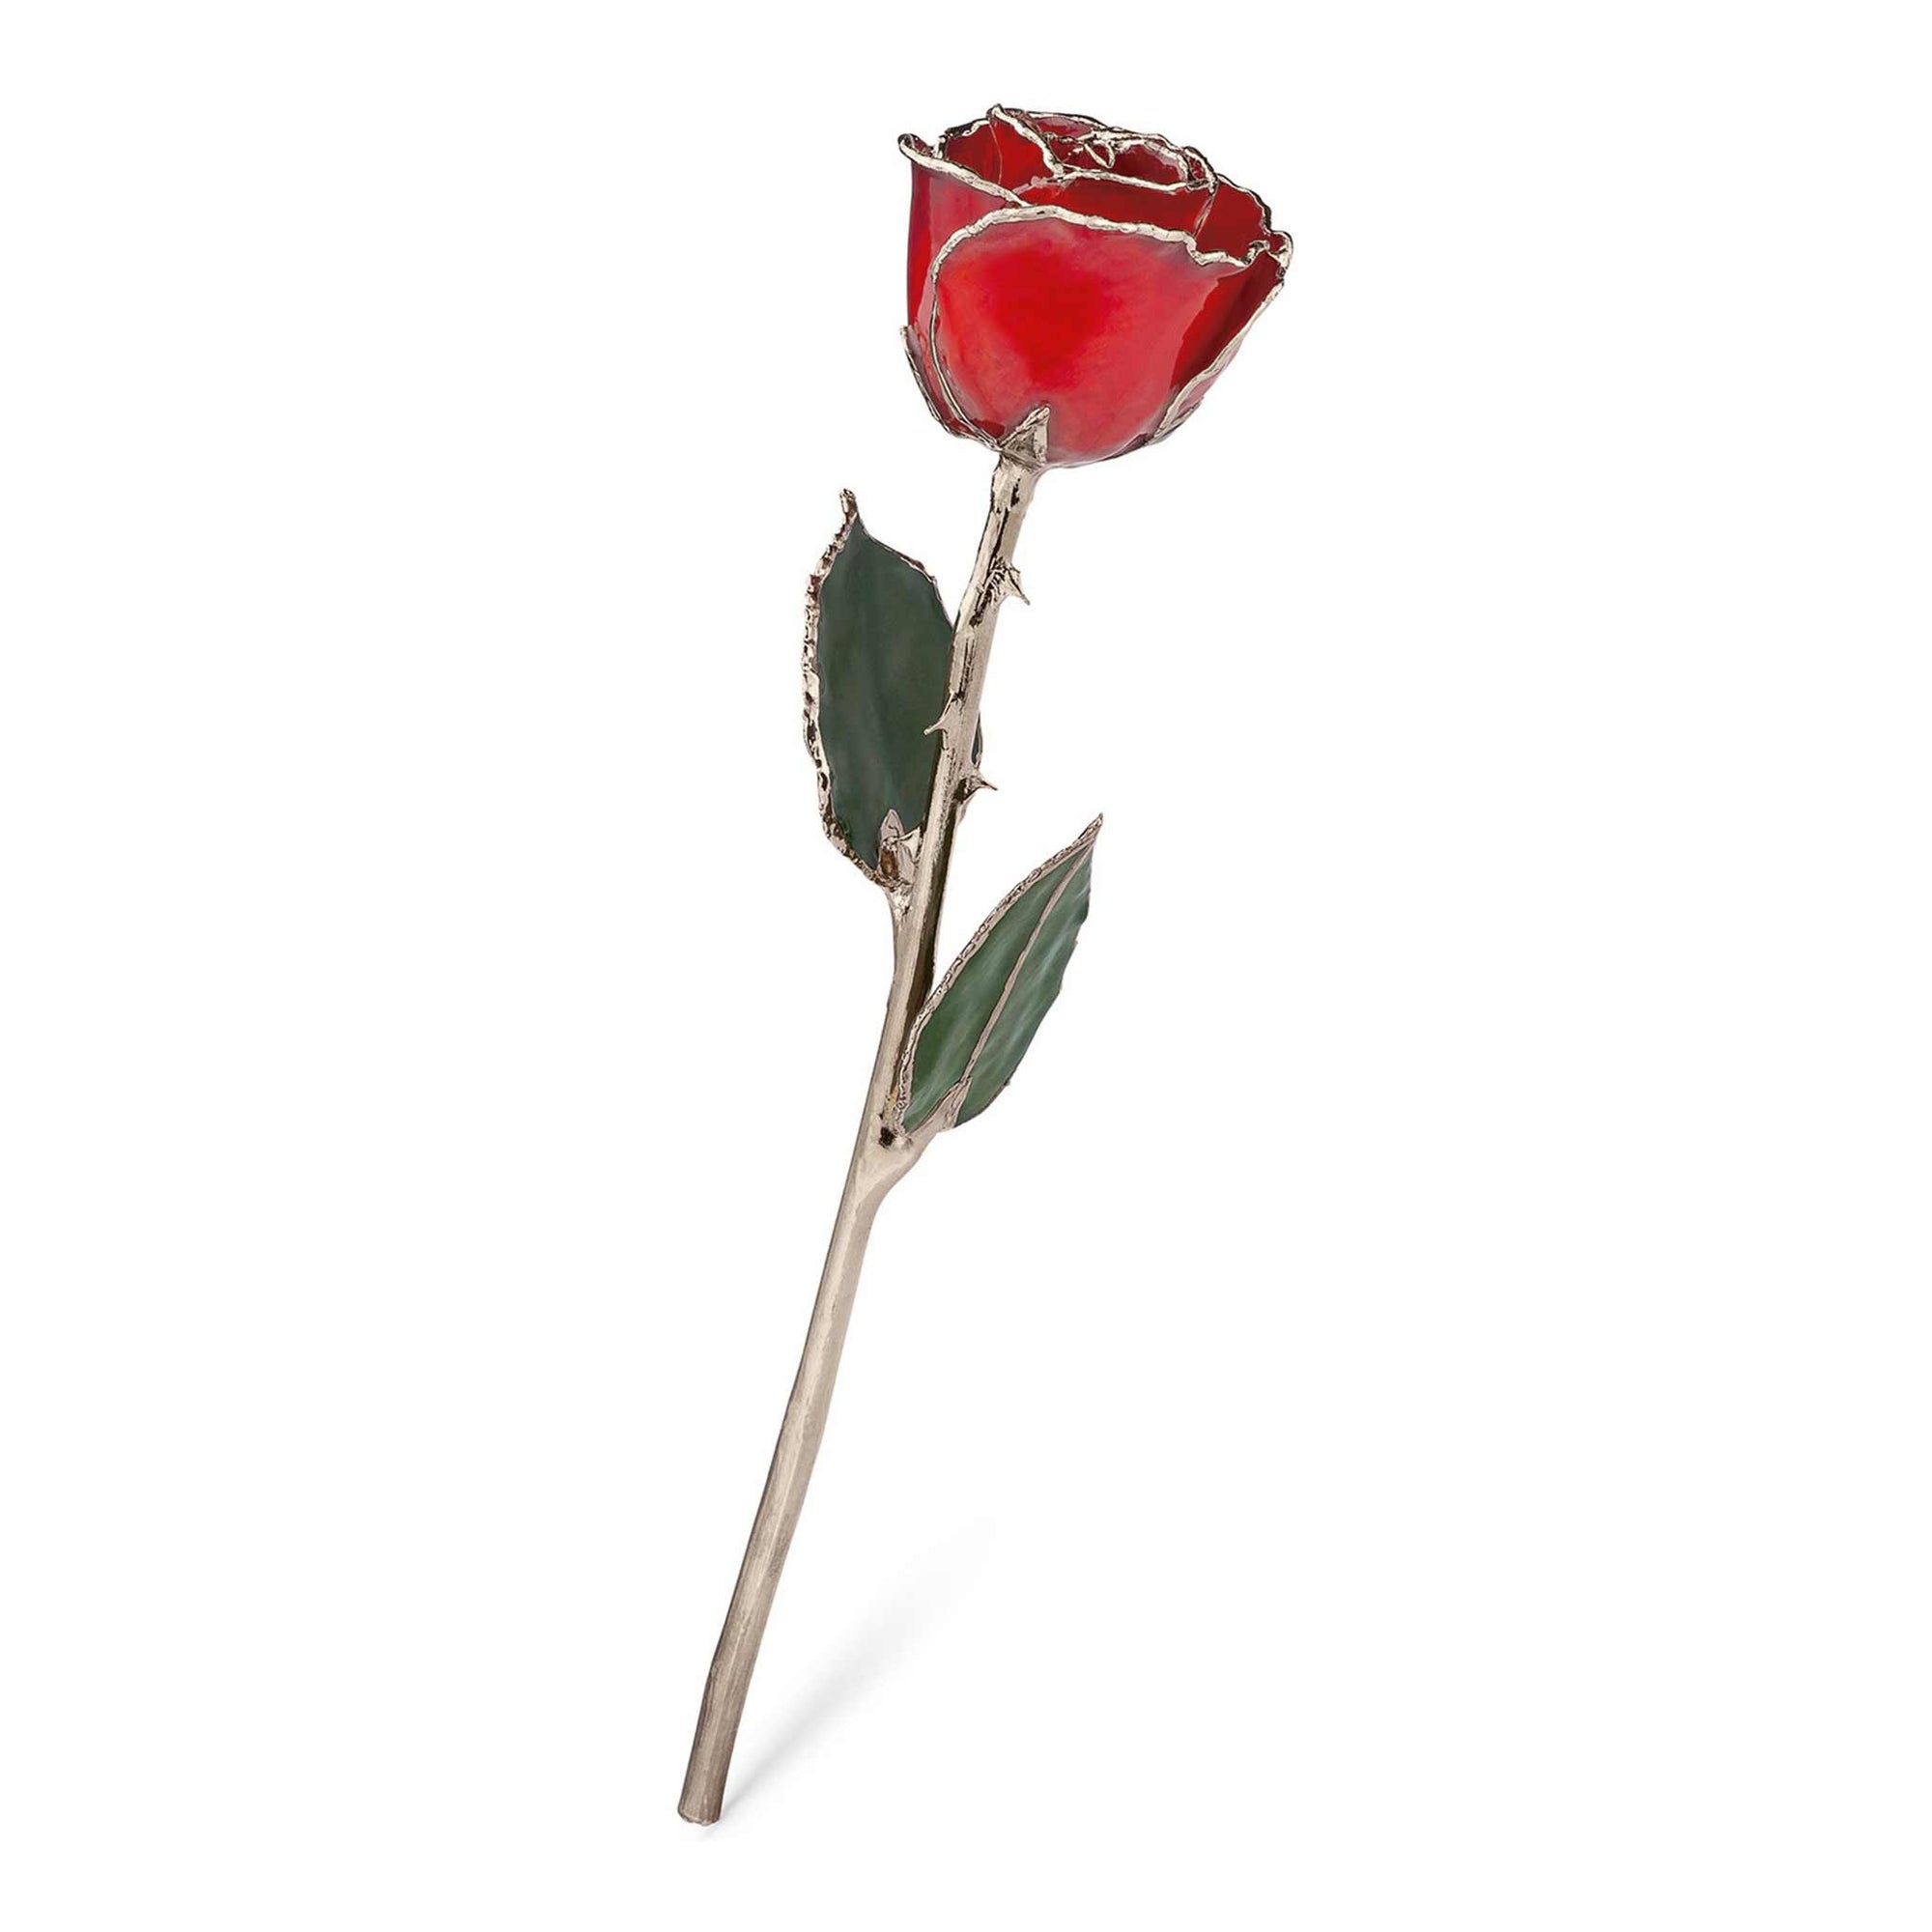  Write a Rose Beautiful Red Rose with Happy Birthday Message, Fresh Cut Flower, Single Rose